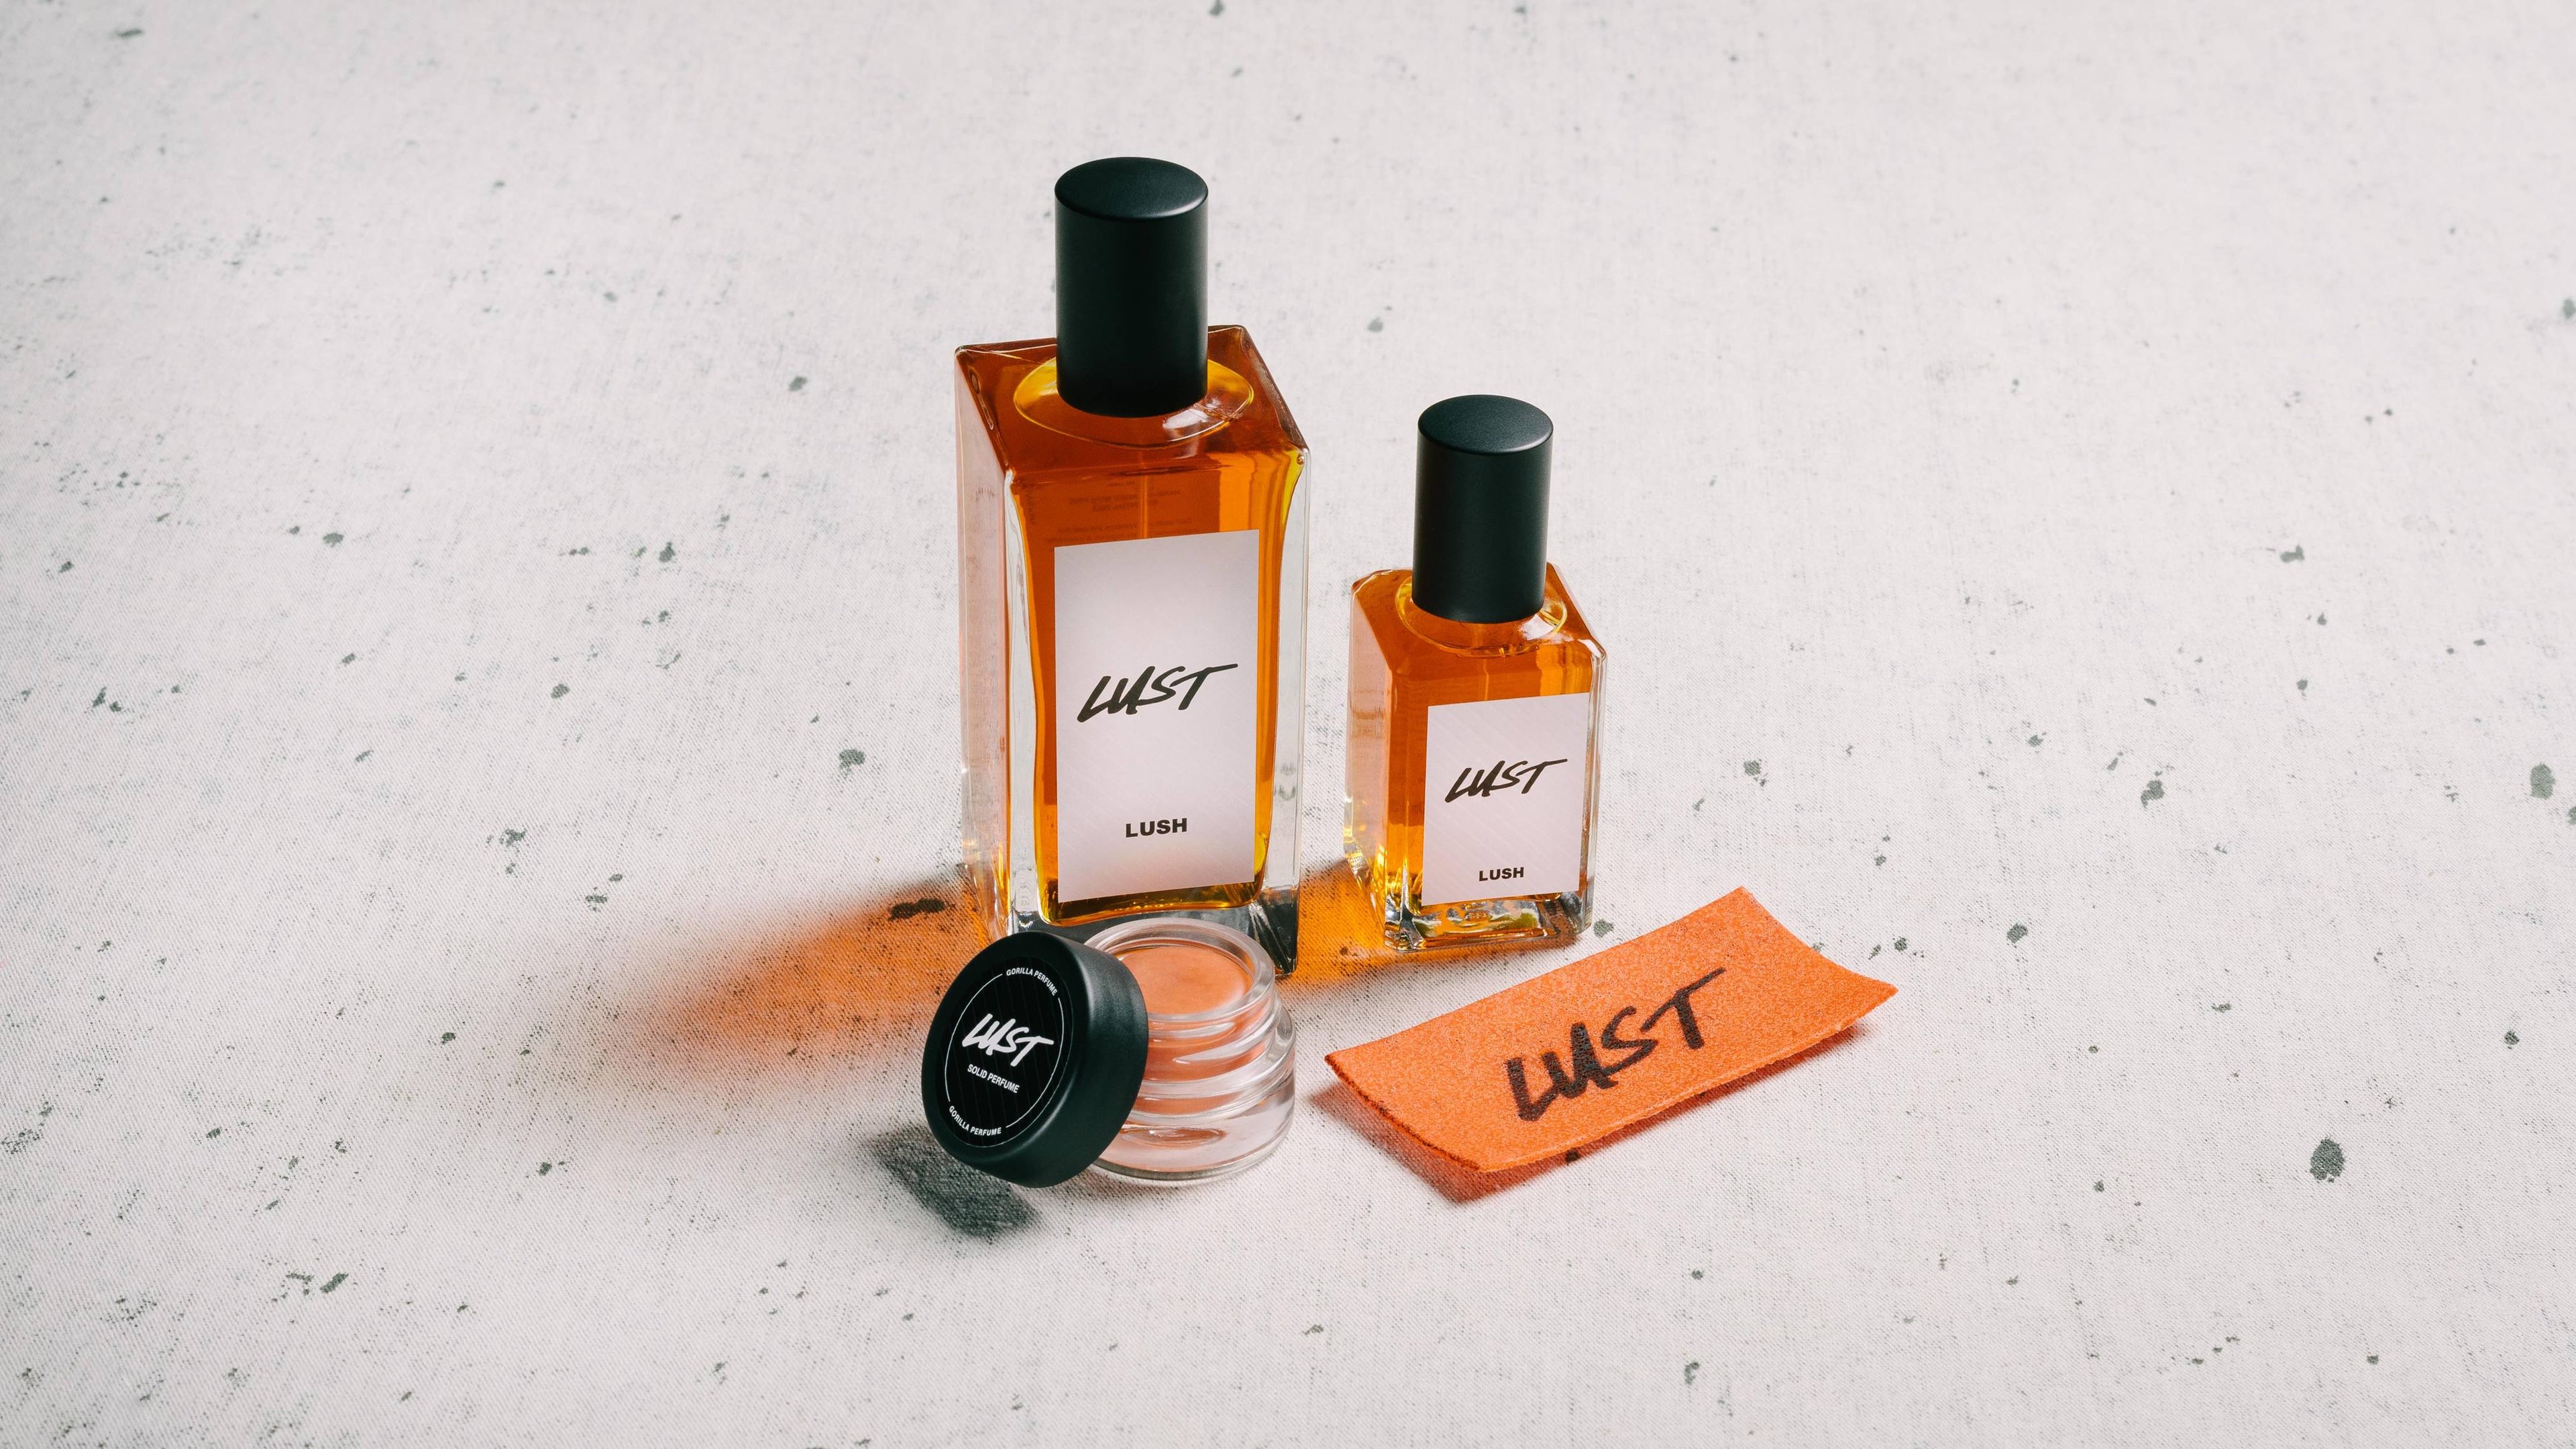 The whole Lust fragrance collection is displayed on a white surface, flecked with grey.